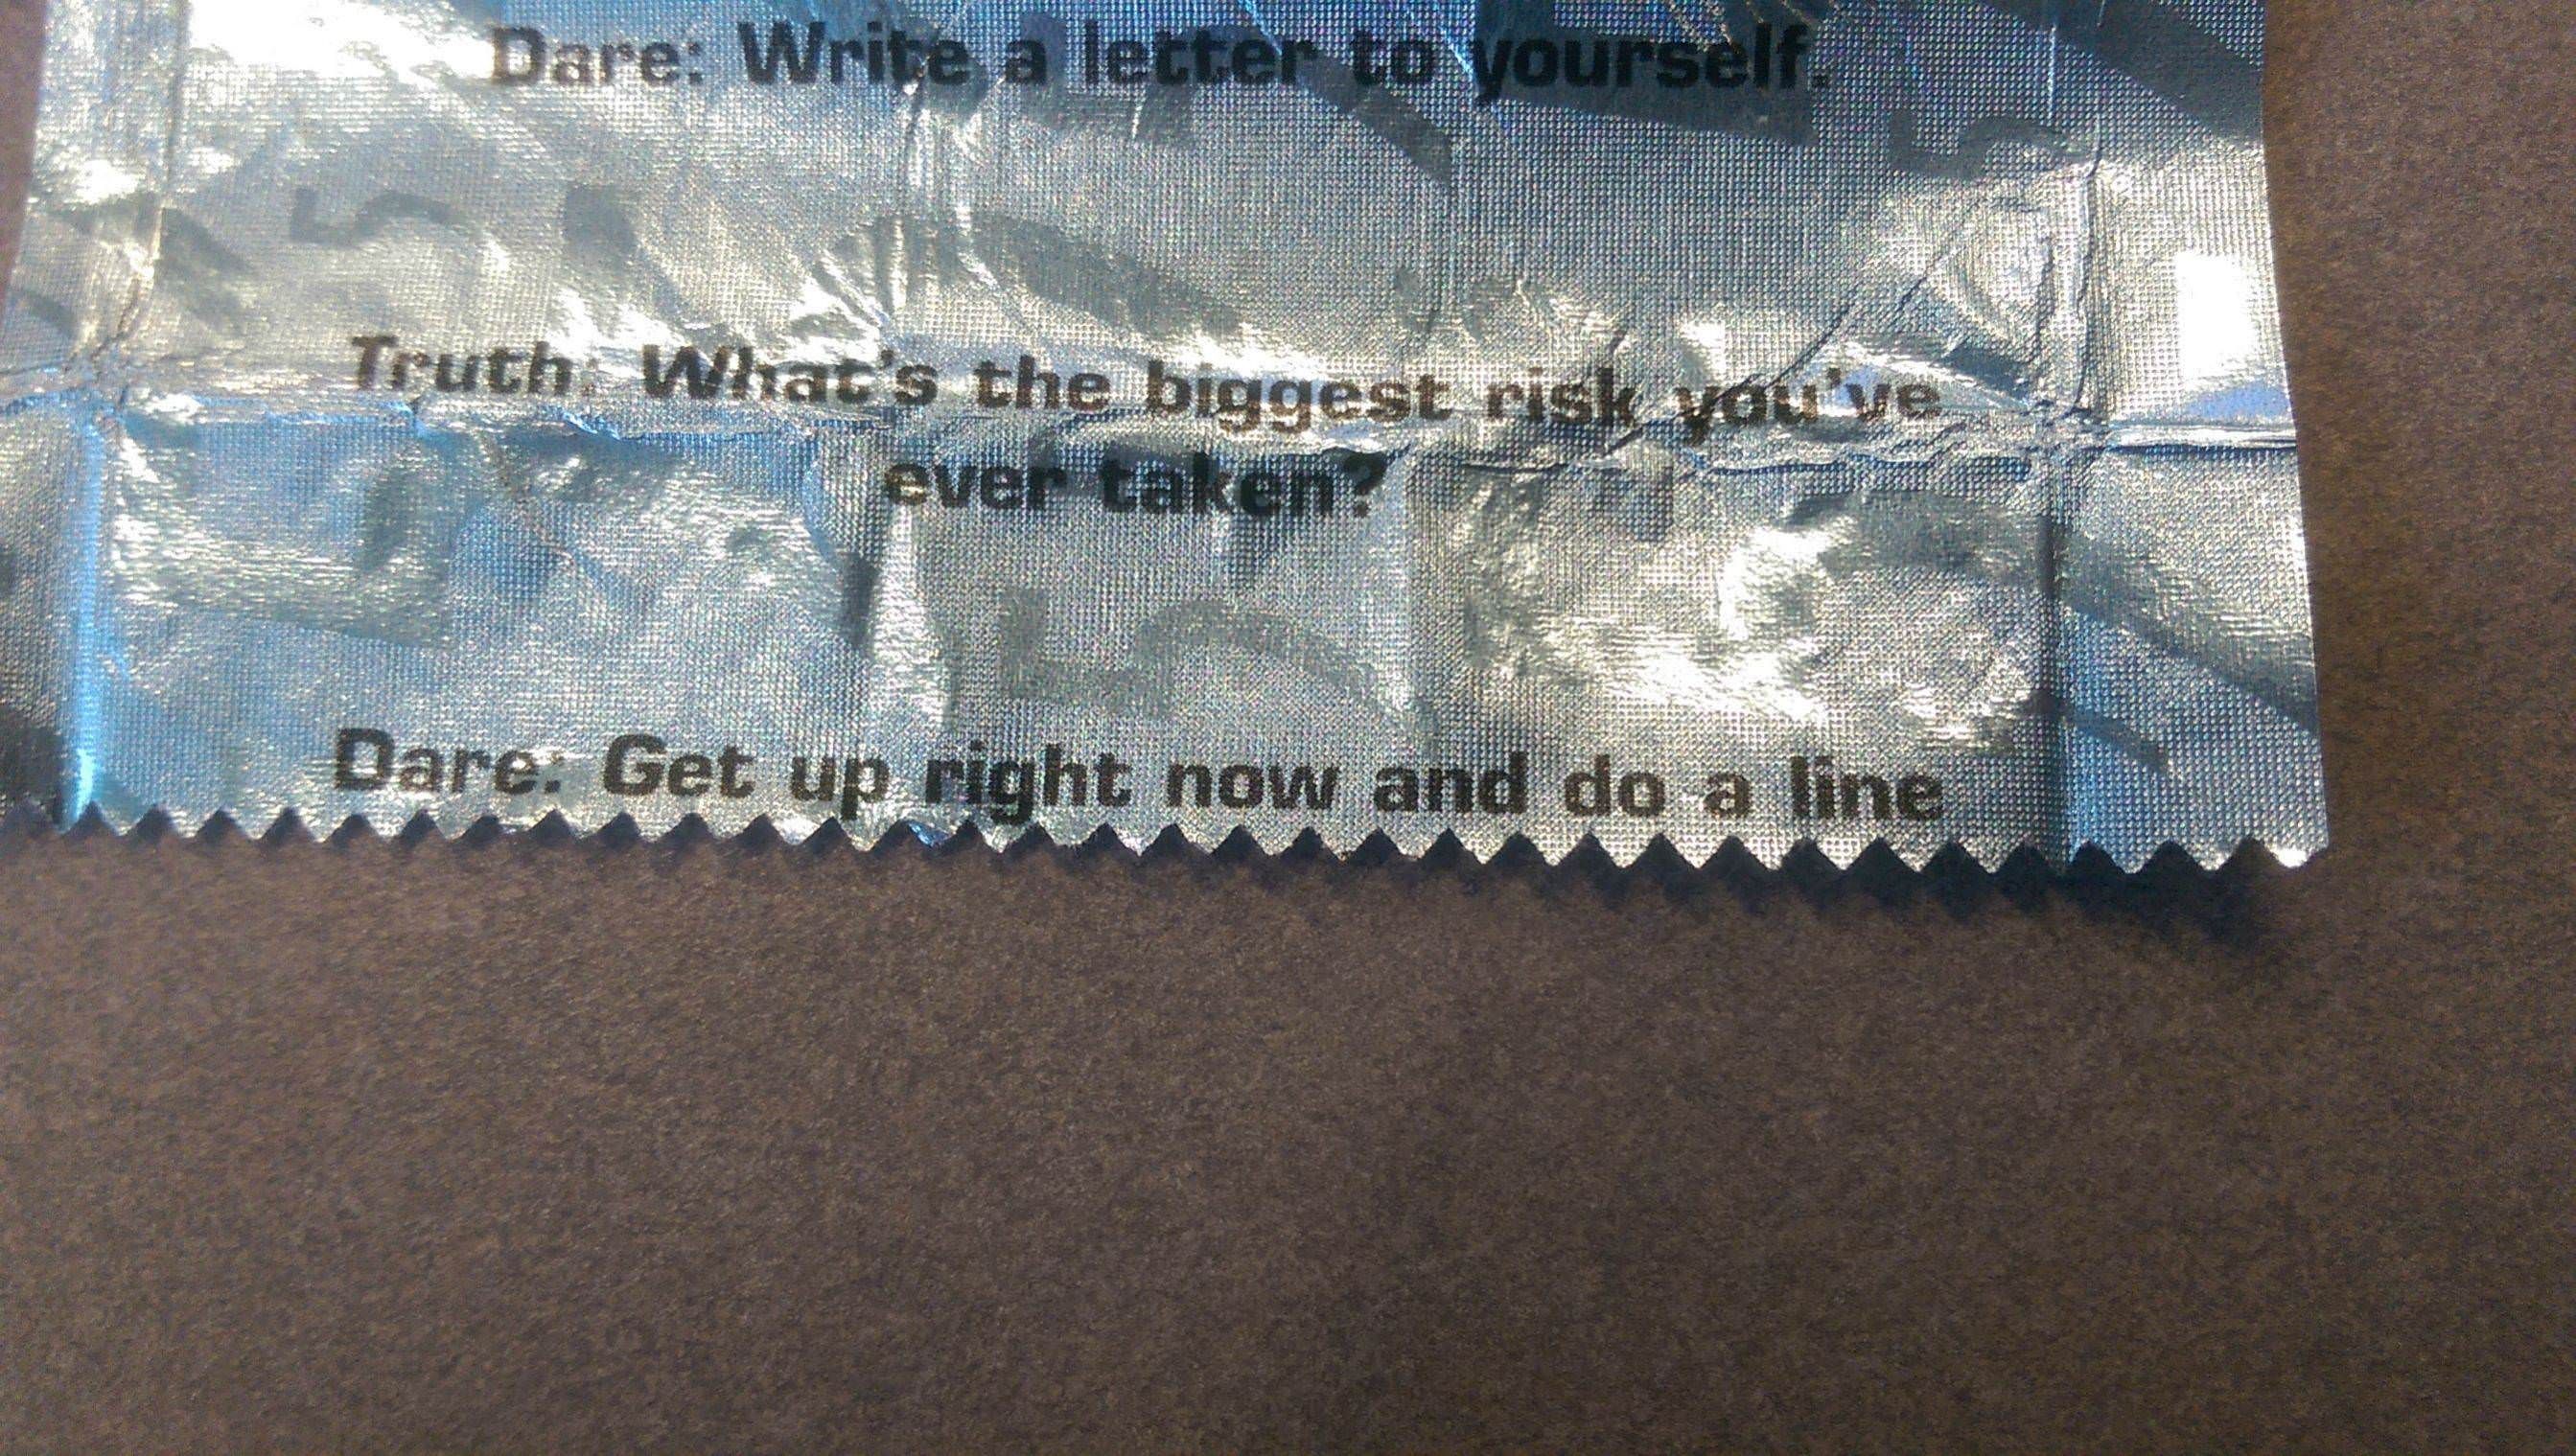 These 5 Gum dares are getting pretty intense...